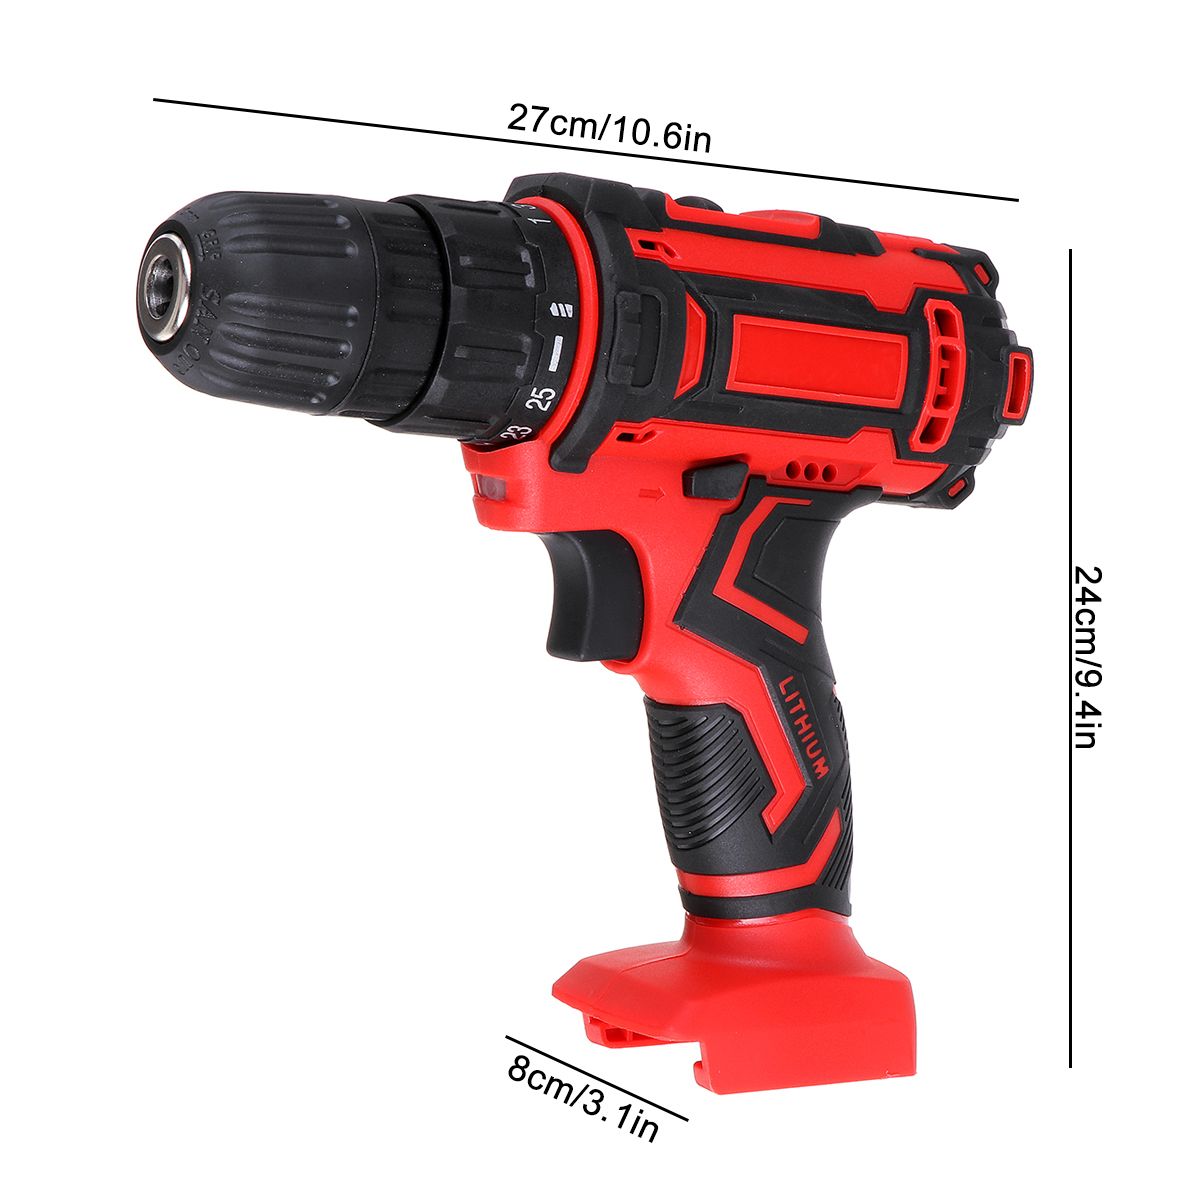 520NM-Cordless-Electric-Drill-Screwdriver-2-Speeds-Fit-For-Makita-18-21V-Battery-1749062